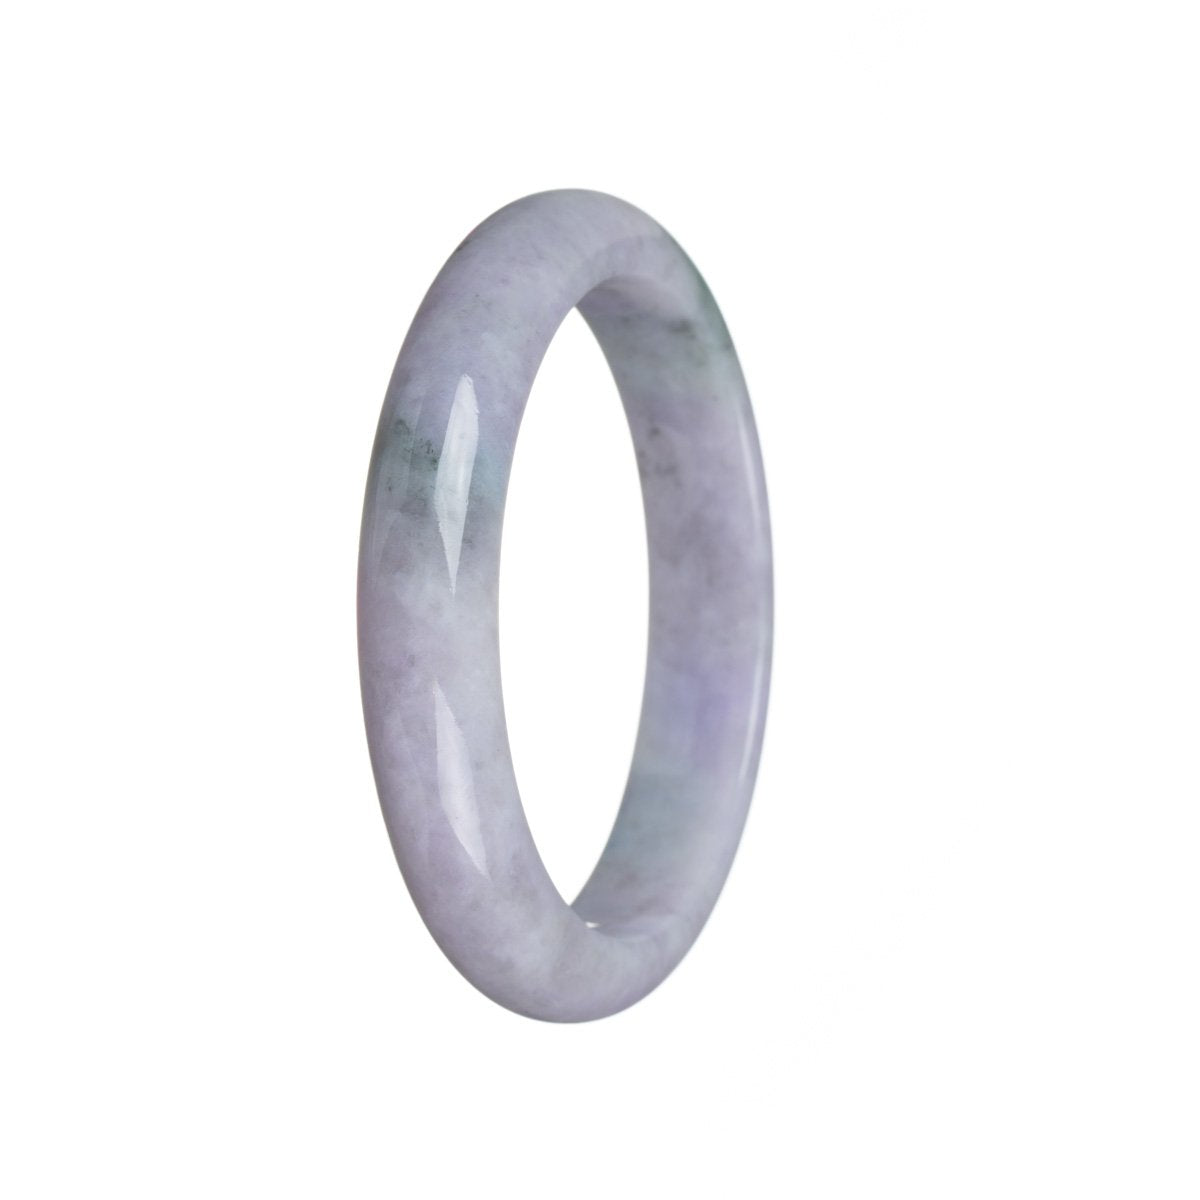 A delicate lavender jadeite bracelet with a semi-round shape, measuring 58mm in size. Crafted from genuine grade A jadeite, this bracelet exudes elegance and sophistication. Perfect for adding a touch of natural beauty to any outfit. Designed by MAYS™.